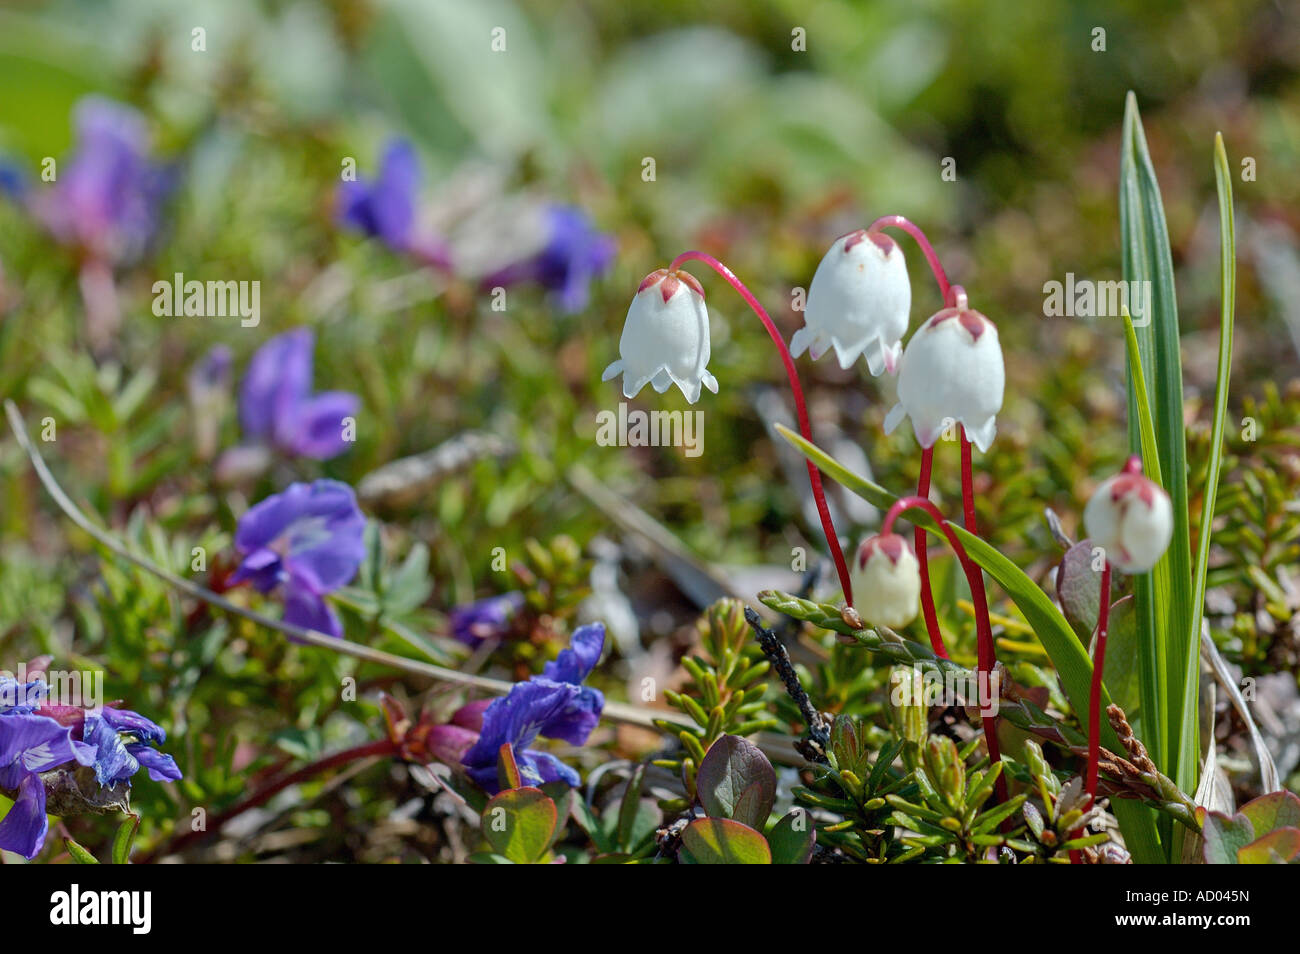 Small flower Phyllodoce caerulea growing in tundra Kamchatka Siberia Pacific coast white bellflower on bright red stems Stock Photo